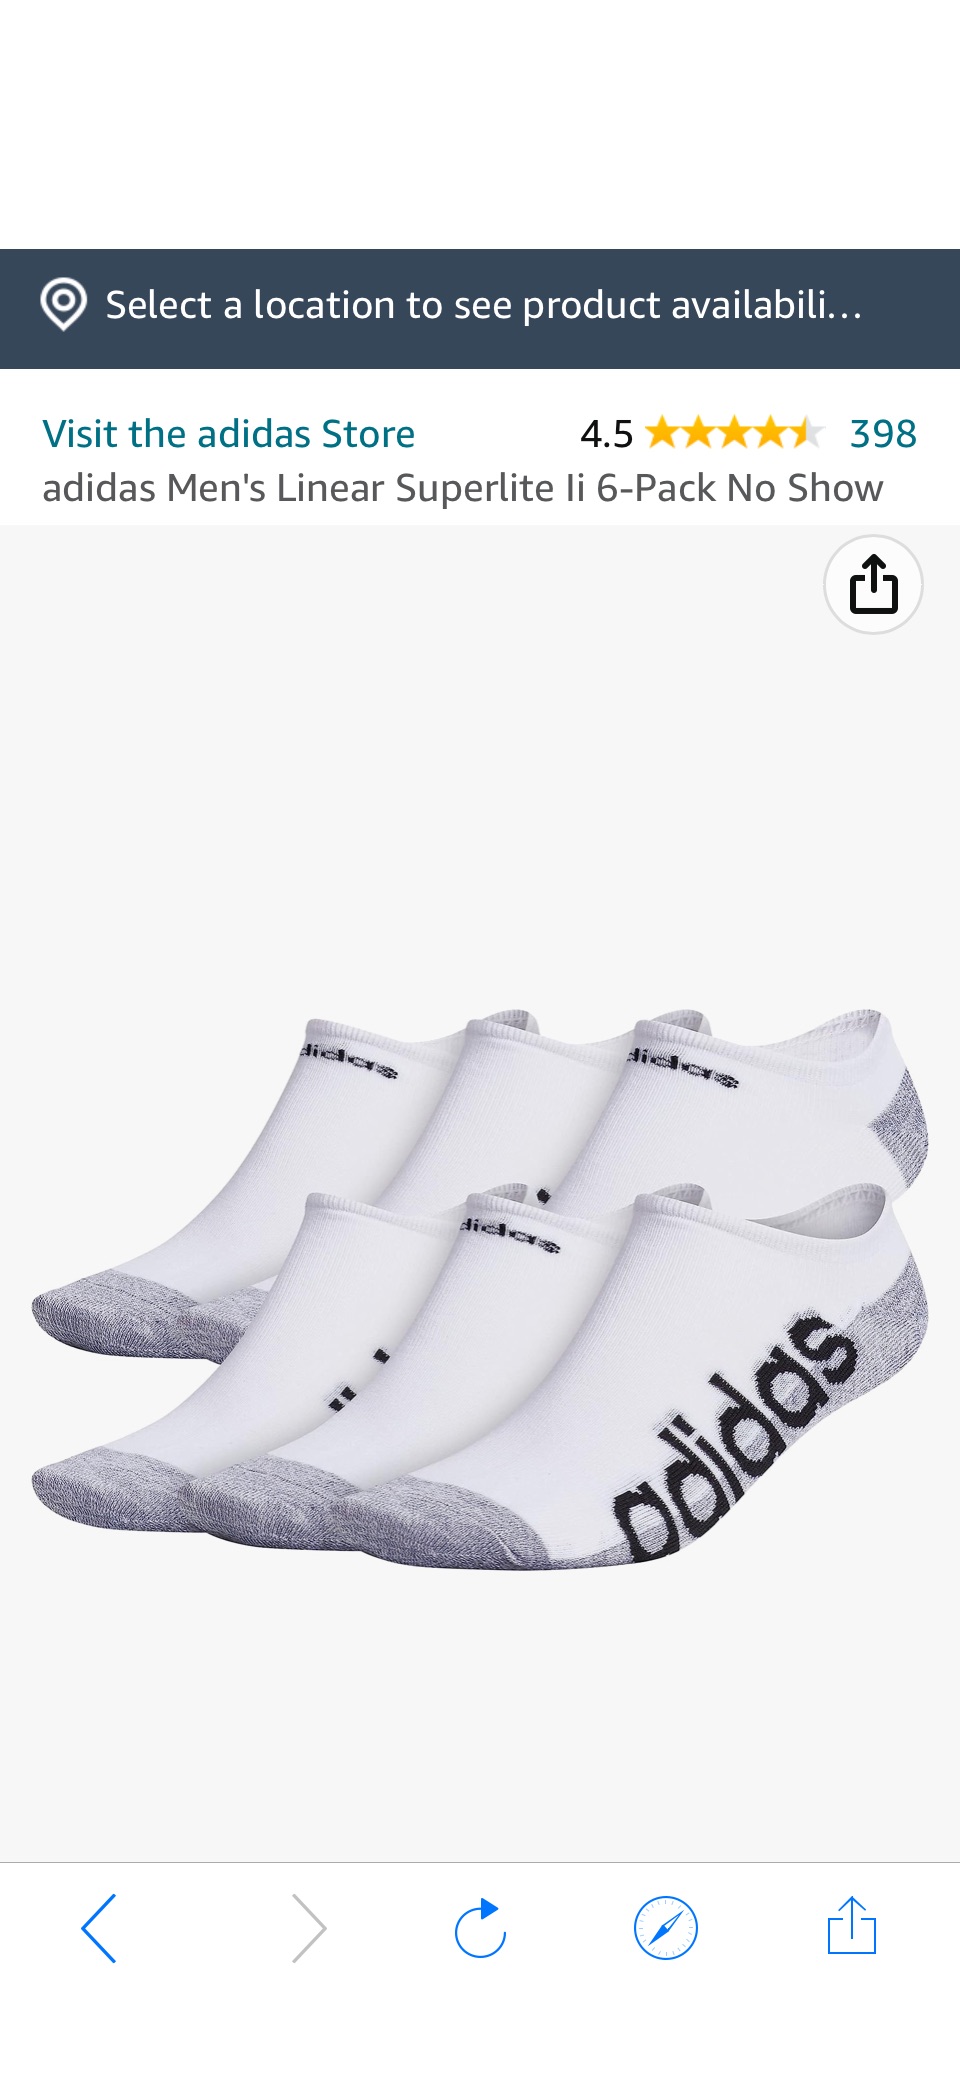 Amazon.com: adidas Men's Linear Superlite II 6-Pack No Show, White/Grey/Black, Large : Clothing, Shoes & Jewelry原价20